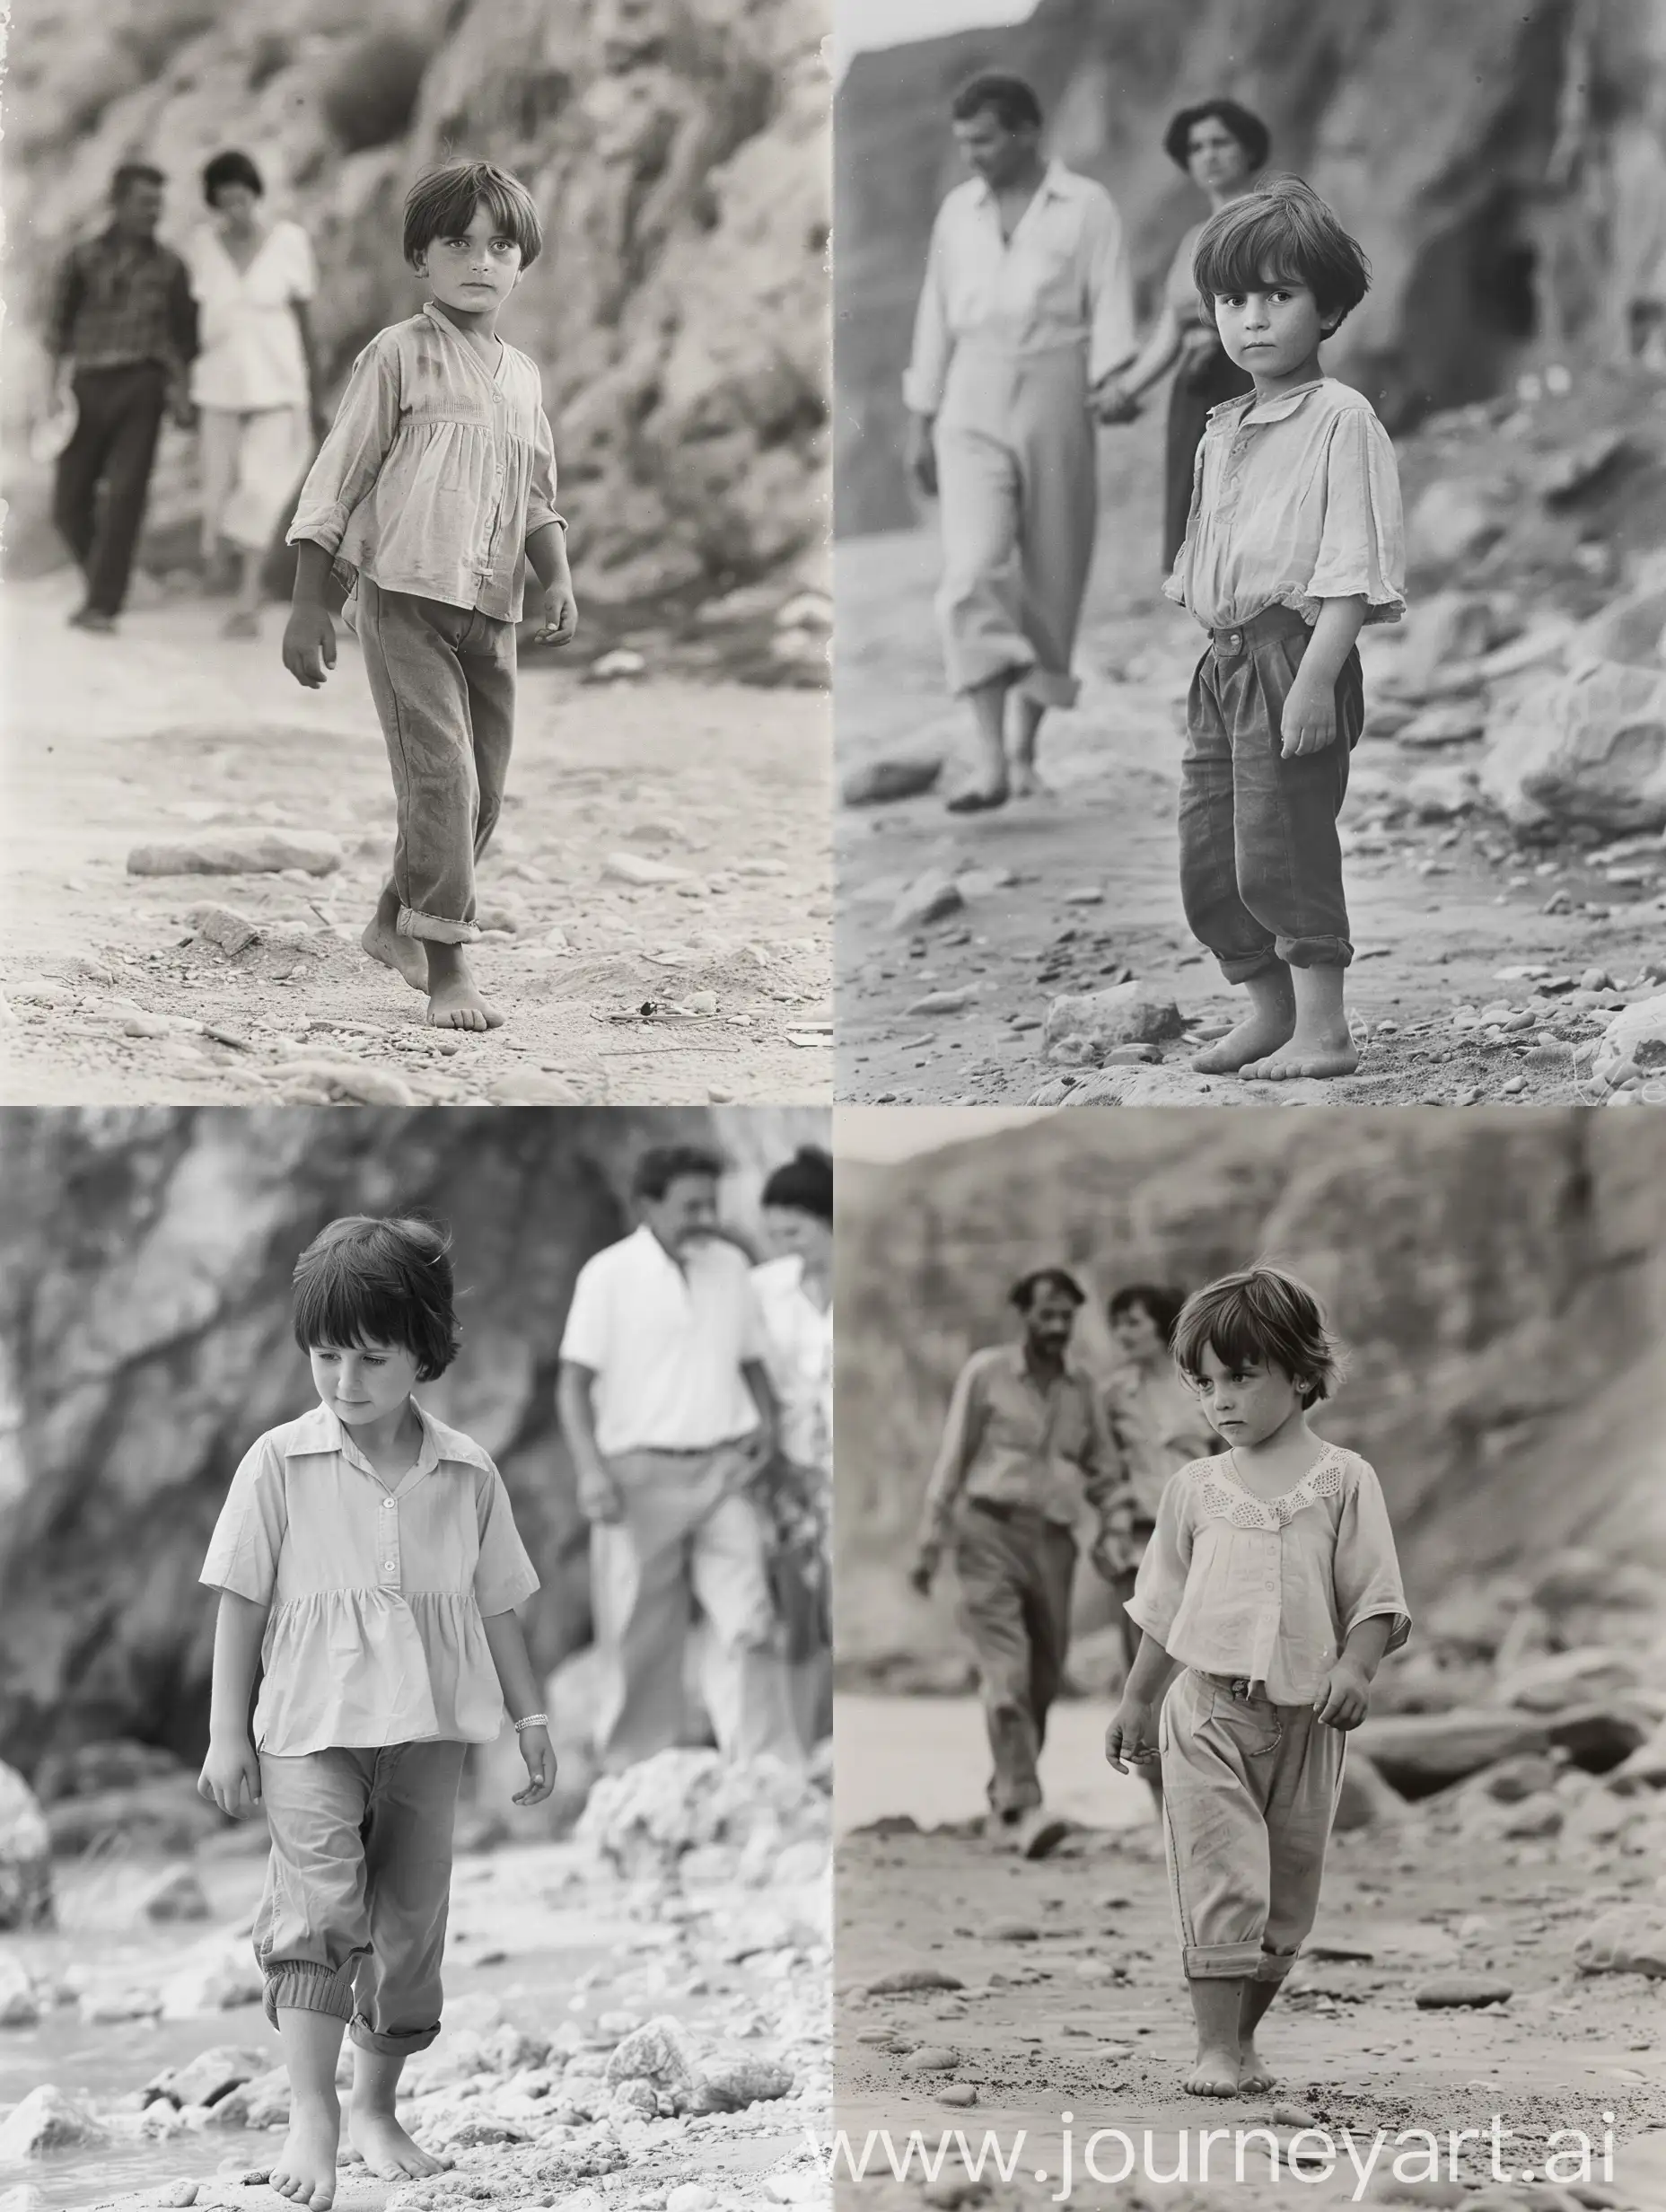 A black and white photo depicts a young girl with short hair walking barefoot along the shore. She is wearing a light blouse and pants rolled up. In the background, a couple, likely her parents, are seen walking hand in hand, faint and out of focus. The scene is set against a backdrop of rocky cliffs, creating a serene and nostalgic atmosphere. The girl's facial expression conveys joy and innocence, capturing an intimate moment of childhood in nature. The overall composition highlights the contrast between the sharp focus on the girl and the blurred soft background, captured in a realistic style by photographer Steve McCurry with high clarity at the focal point: f/4.5, 3:4, V6.